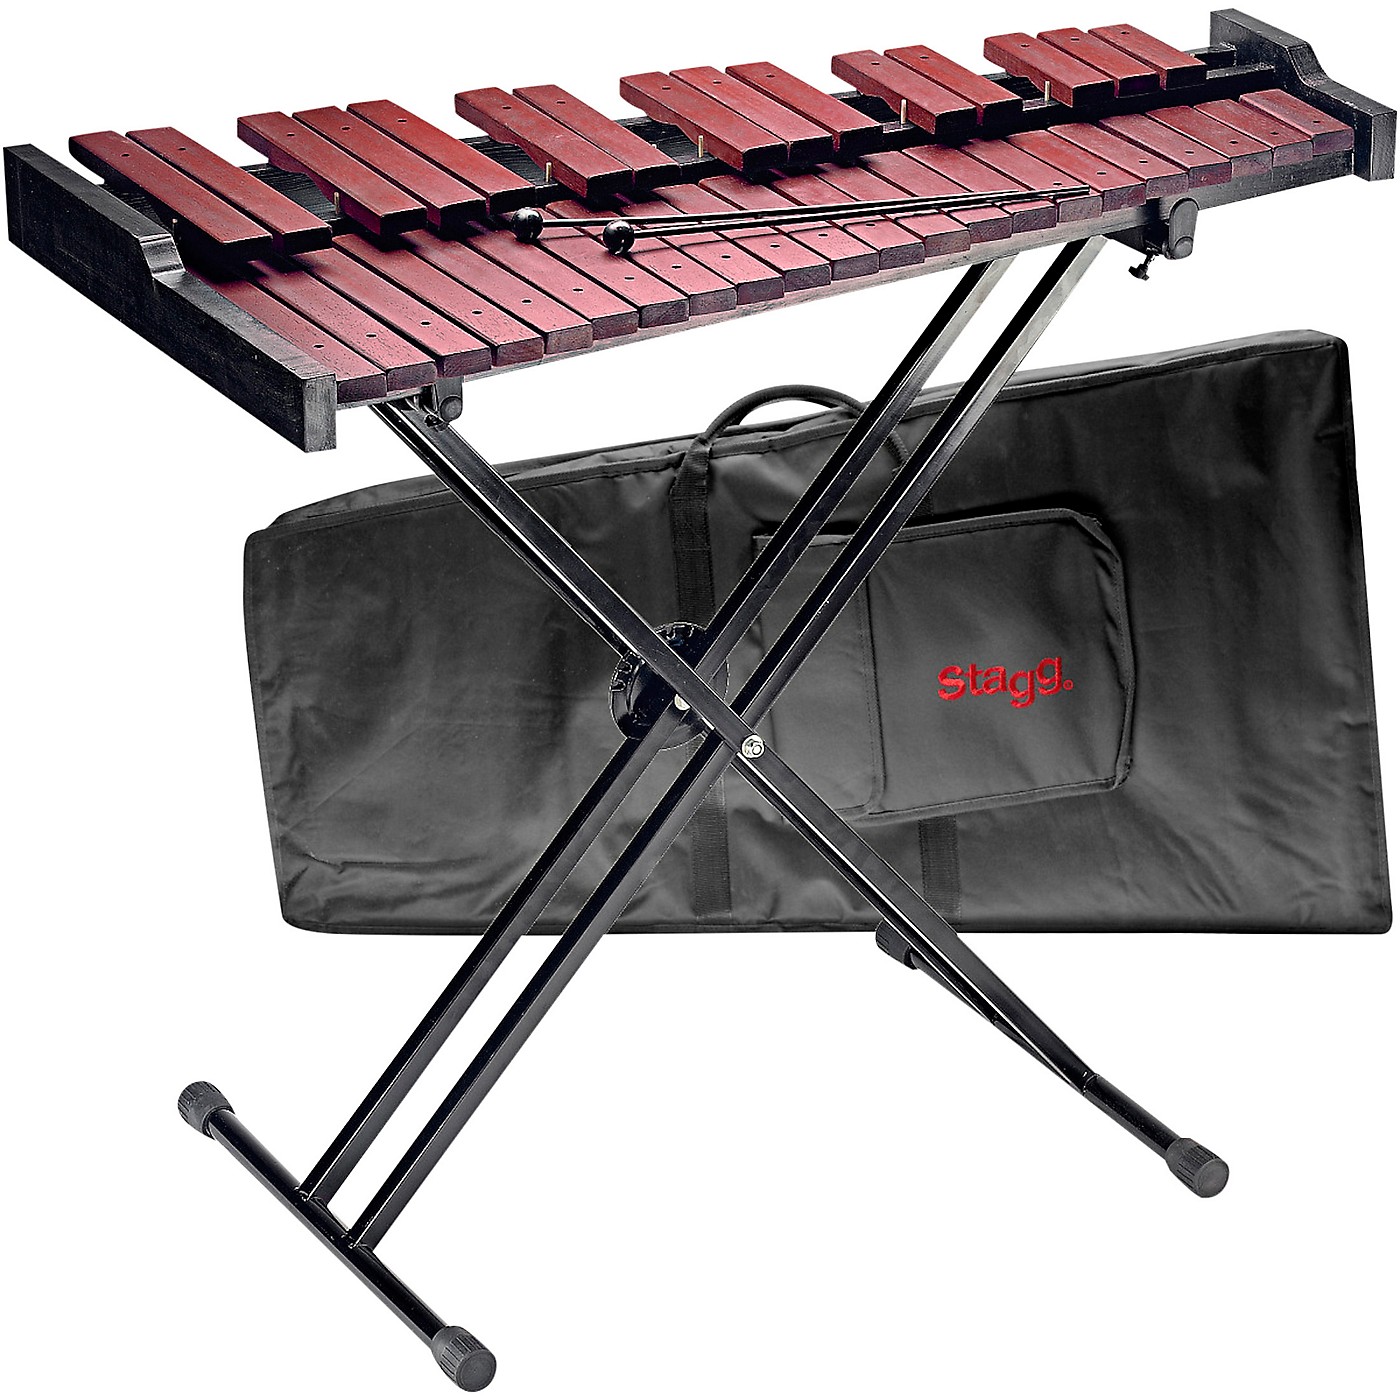 Stagg Xylo-Set 37 HG 3 Octave Xylophone with Stand and Bag thumbnail